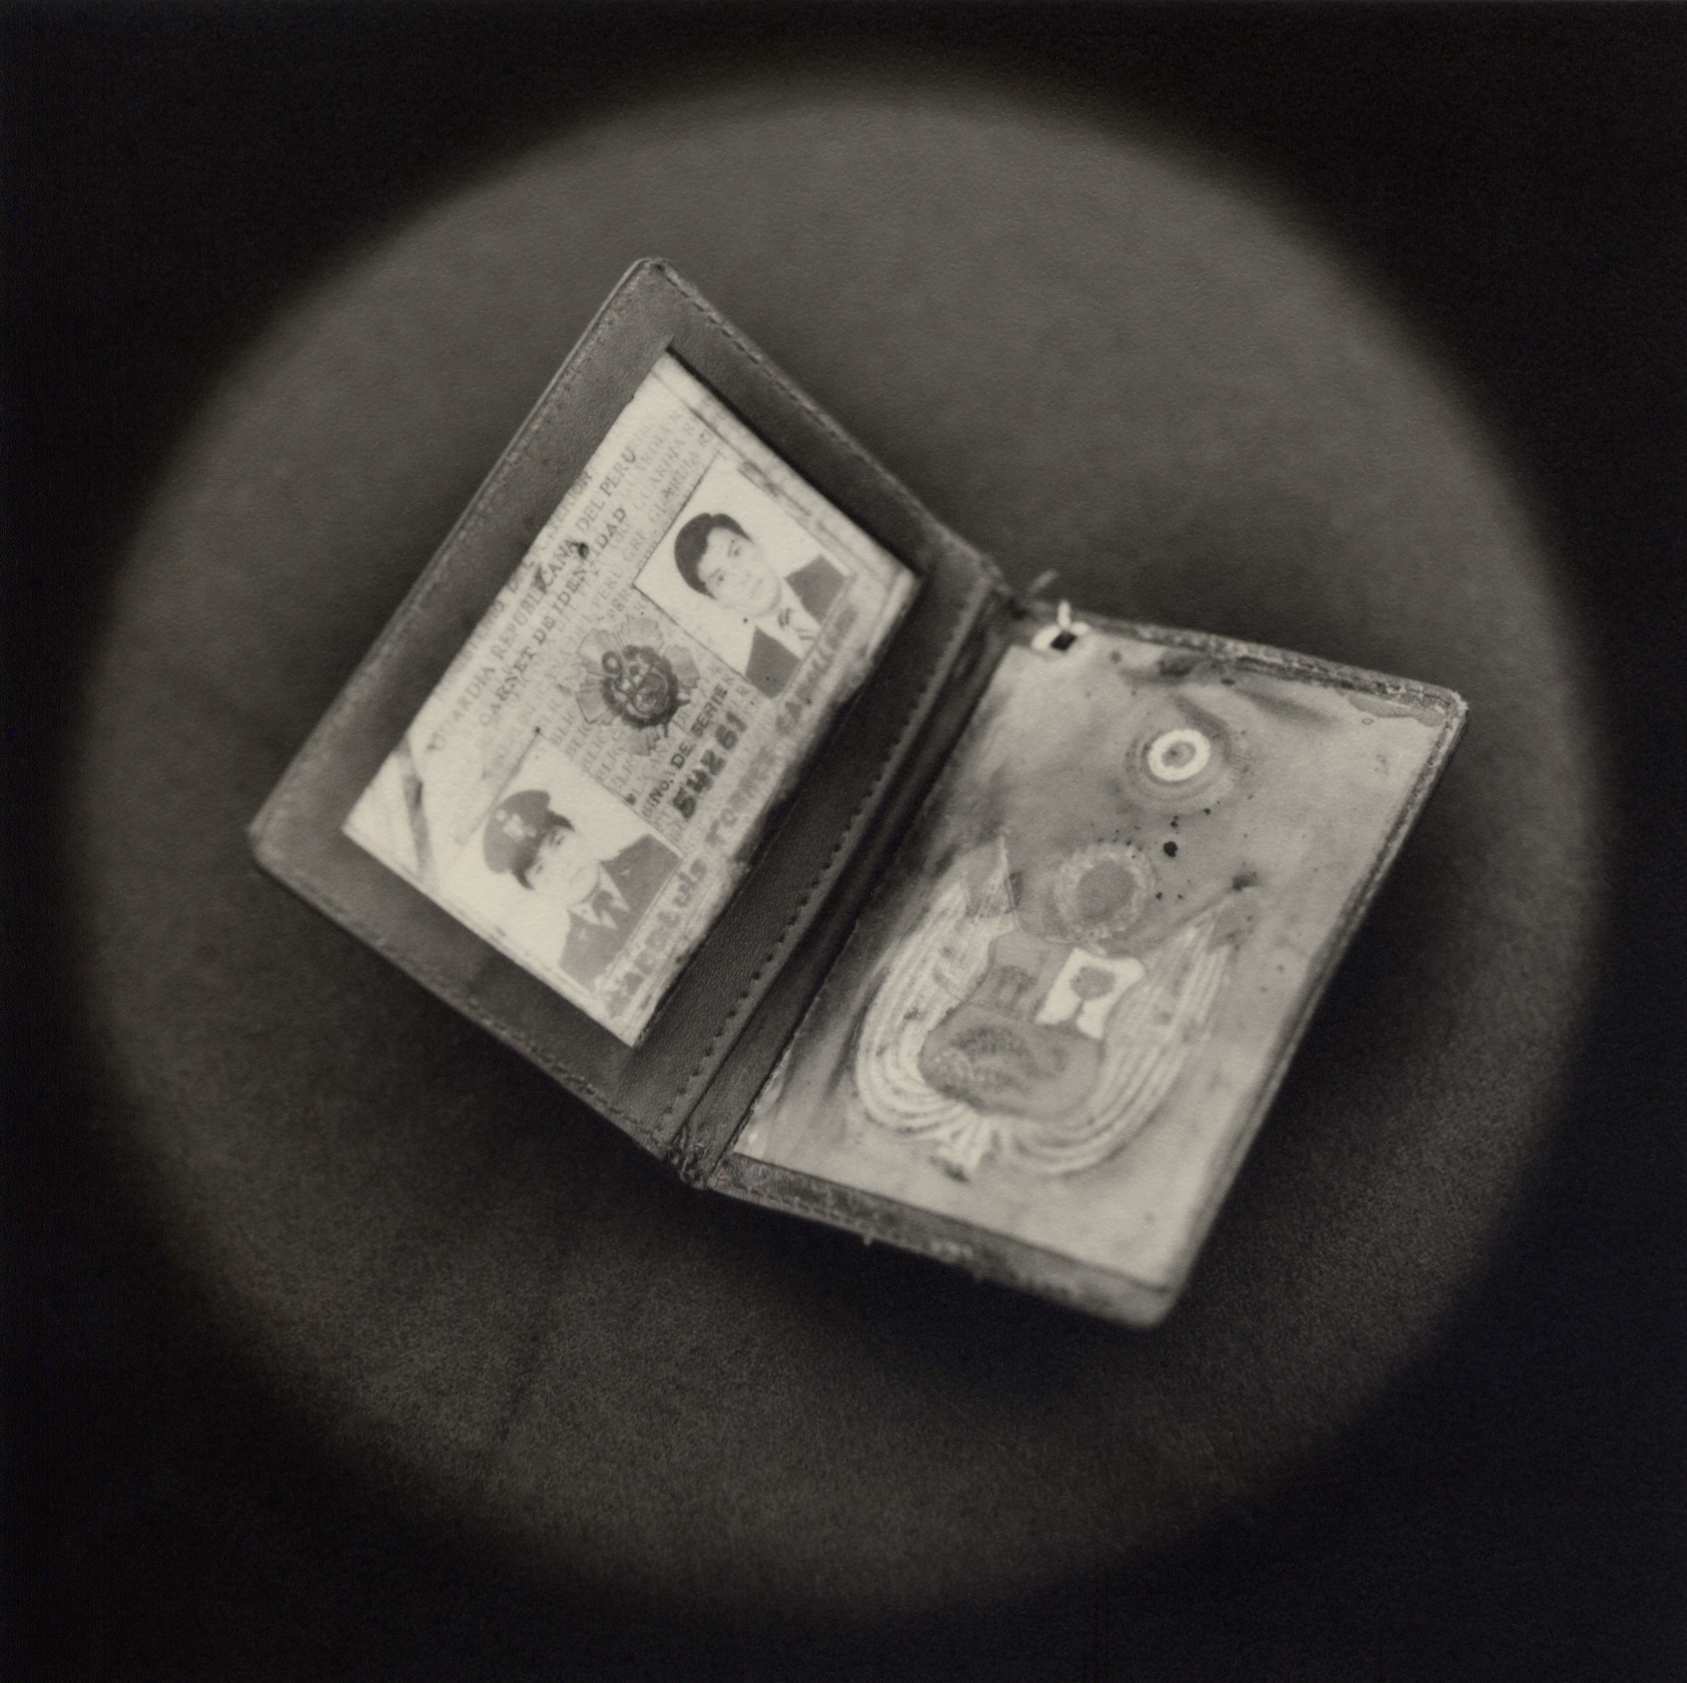   Fake police ID used by terrorist    Toned gelatin silver print.   16 x 16 in. (40 x 40 cm.) 